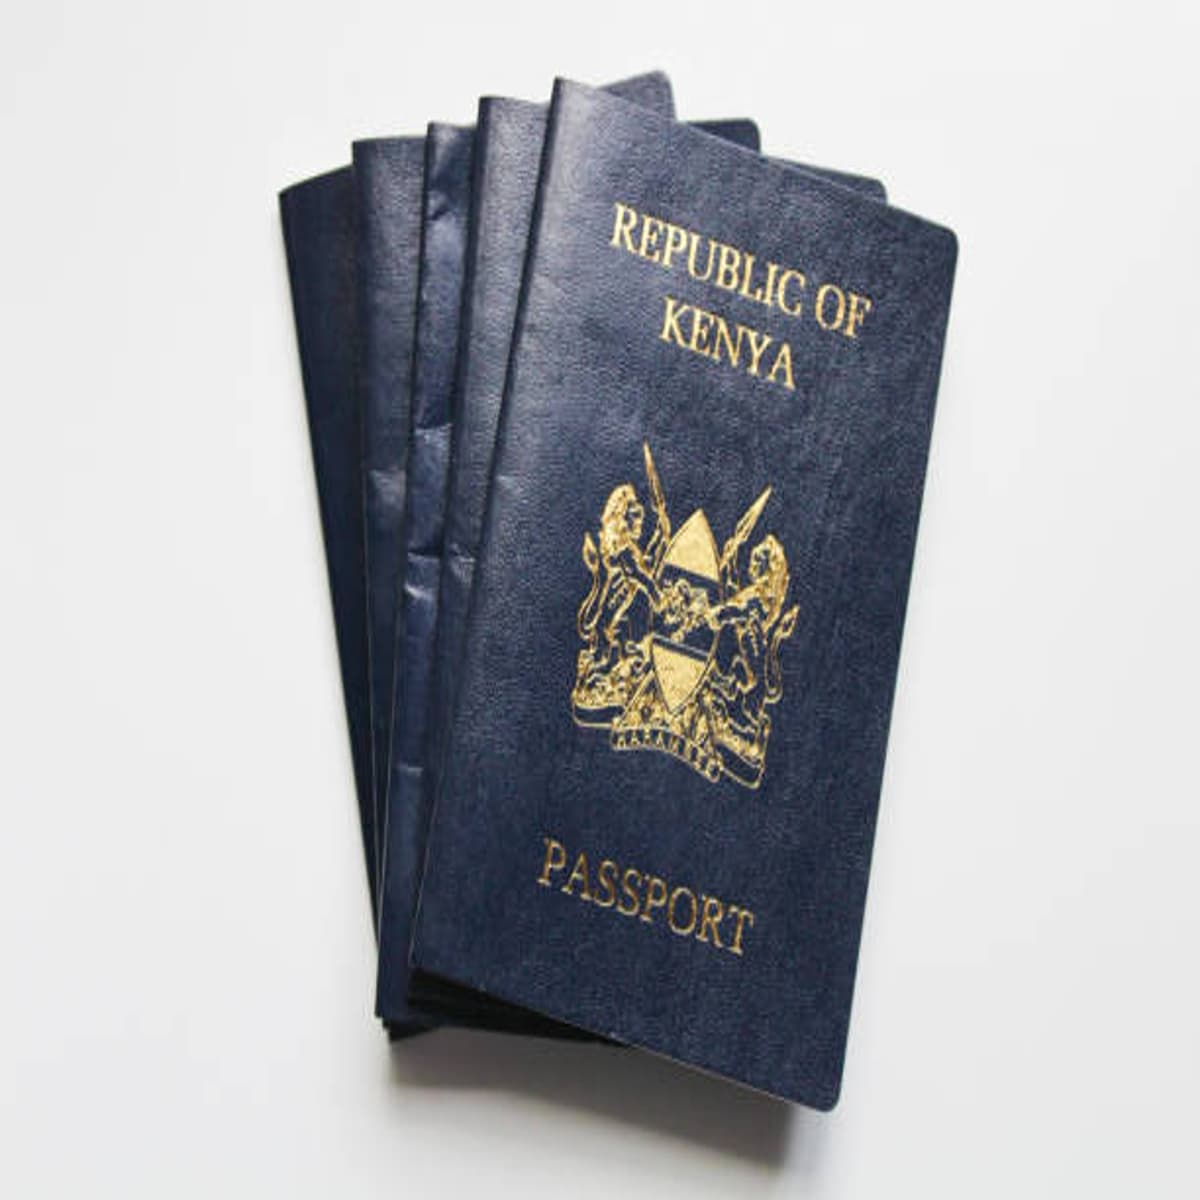 How much is Passport Application in Kenya?